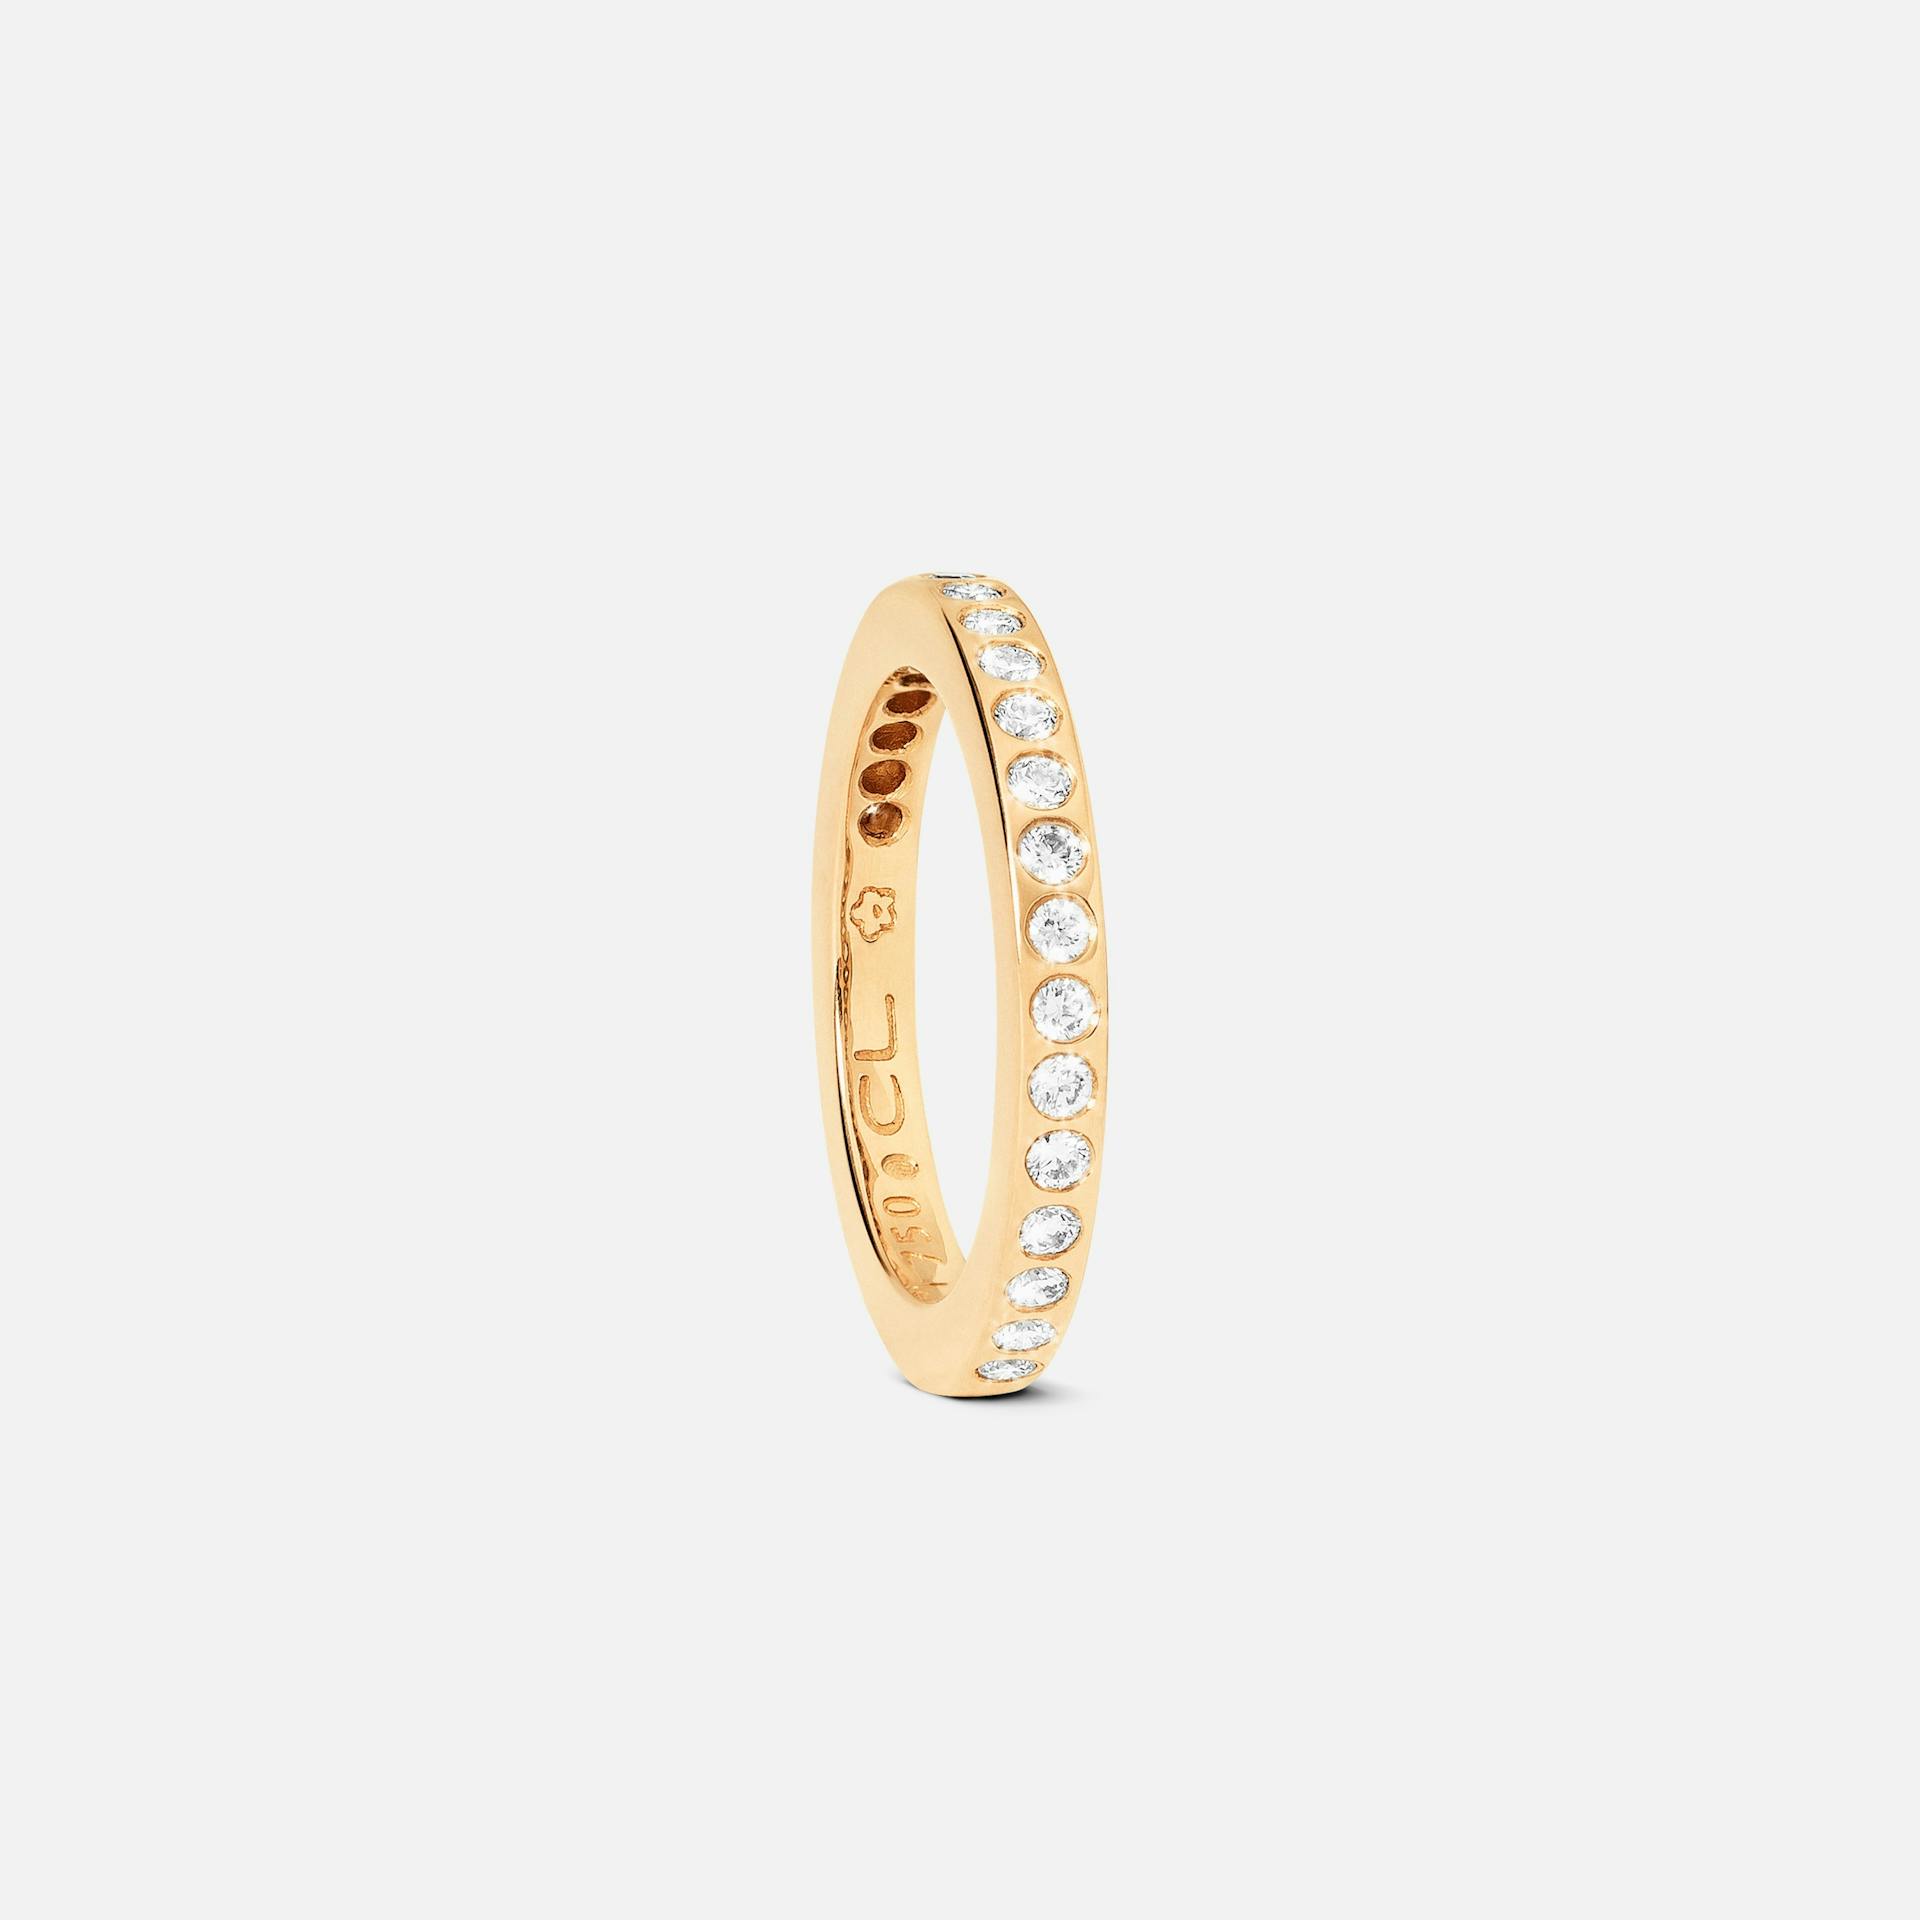 Forever Love Alliance Ring in Polished Yellow Gold with Diamonds  |  Ole Lynggaard Copenhagen